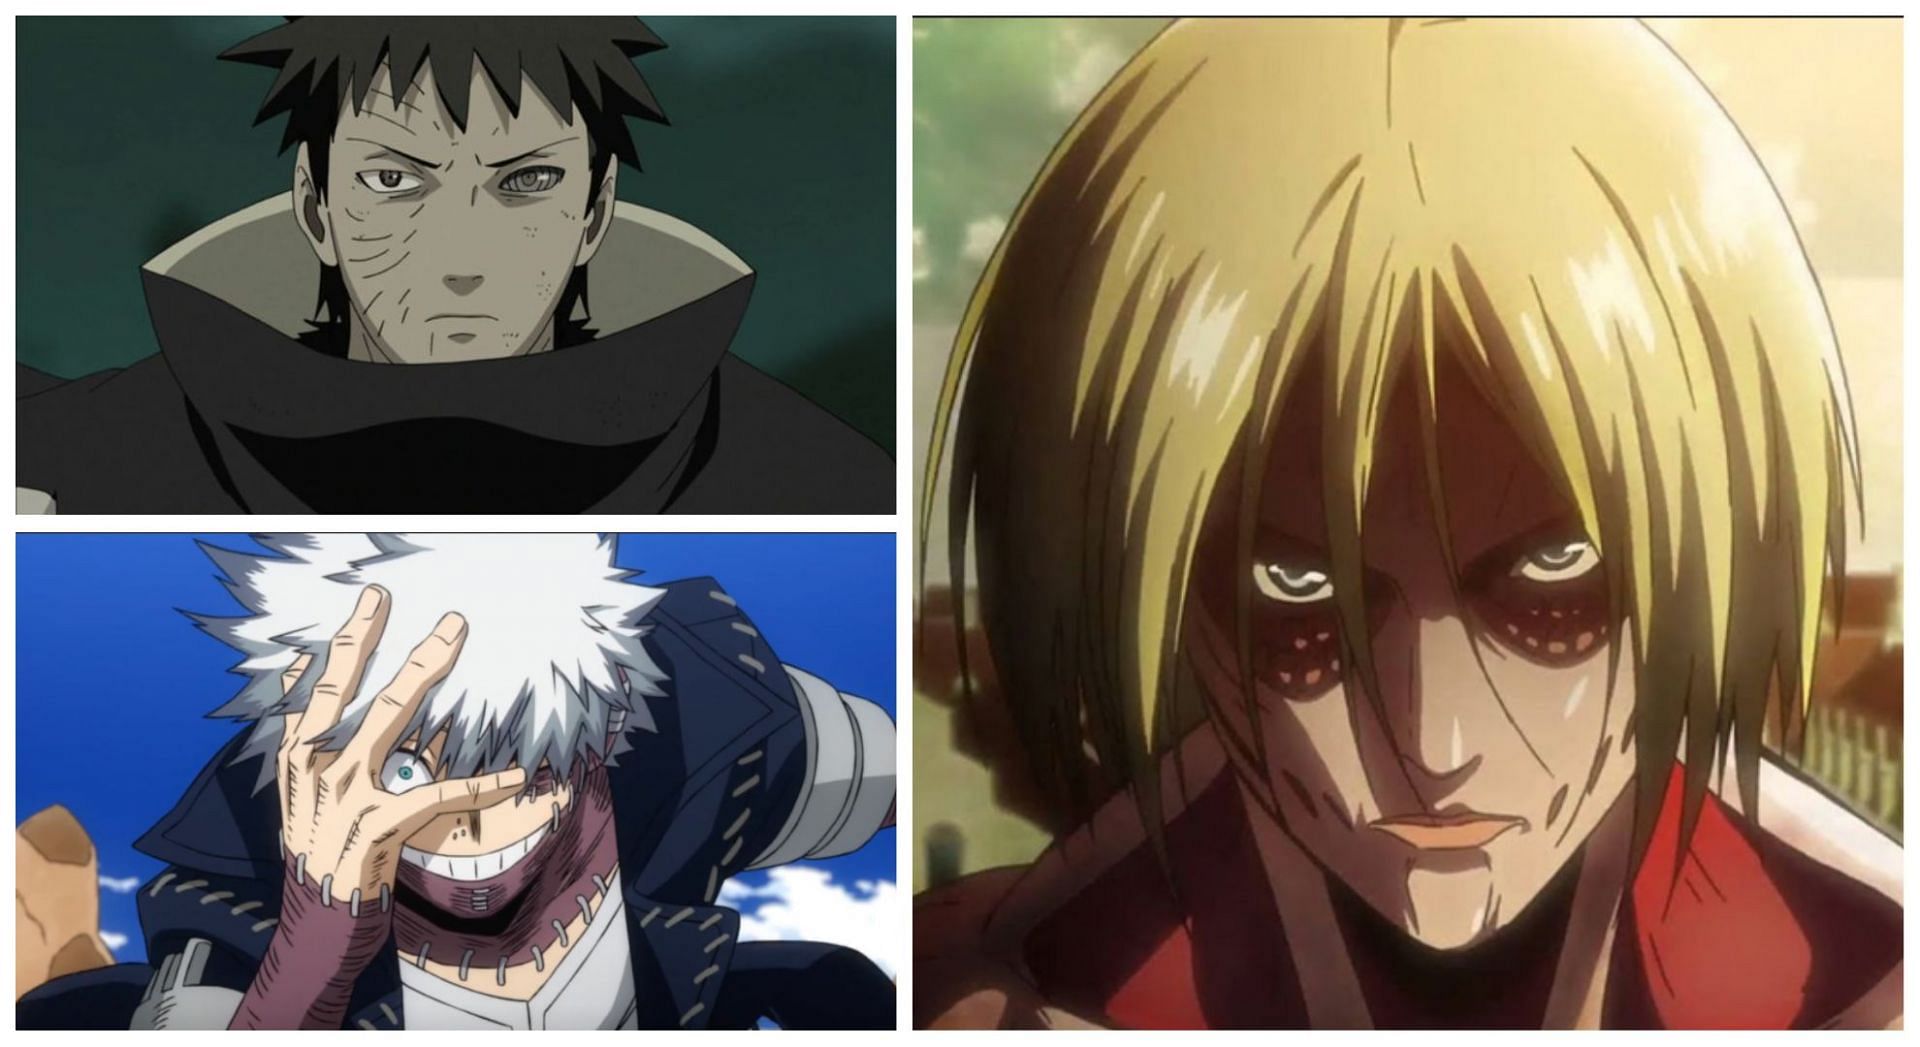 Fan Theories That Make An Anime Story Better